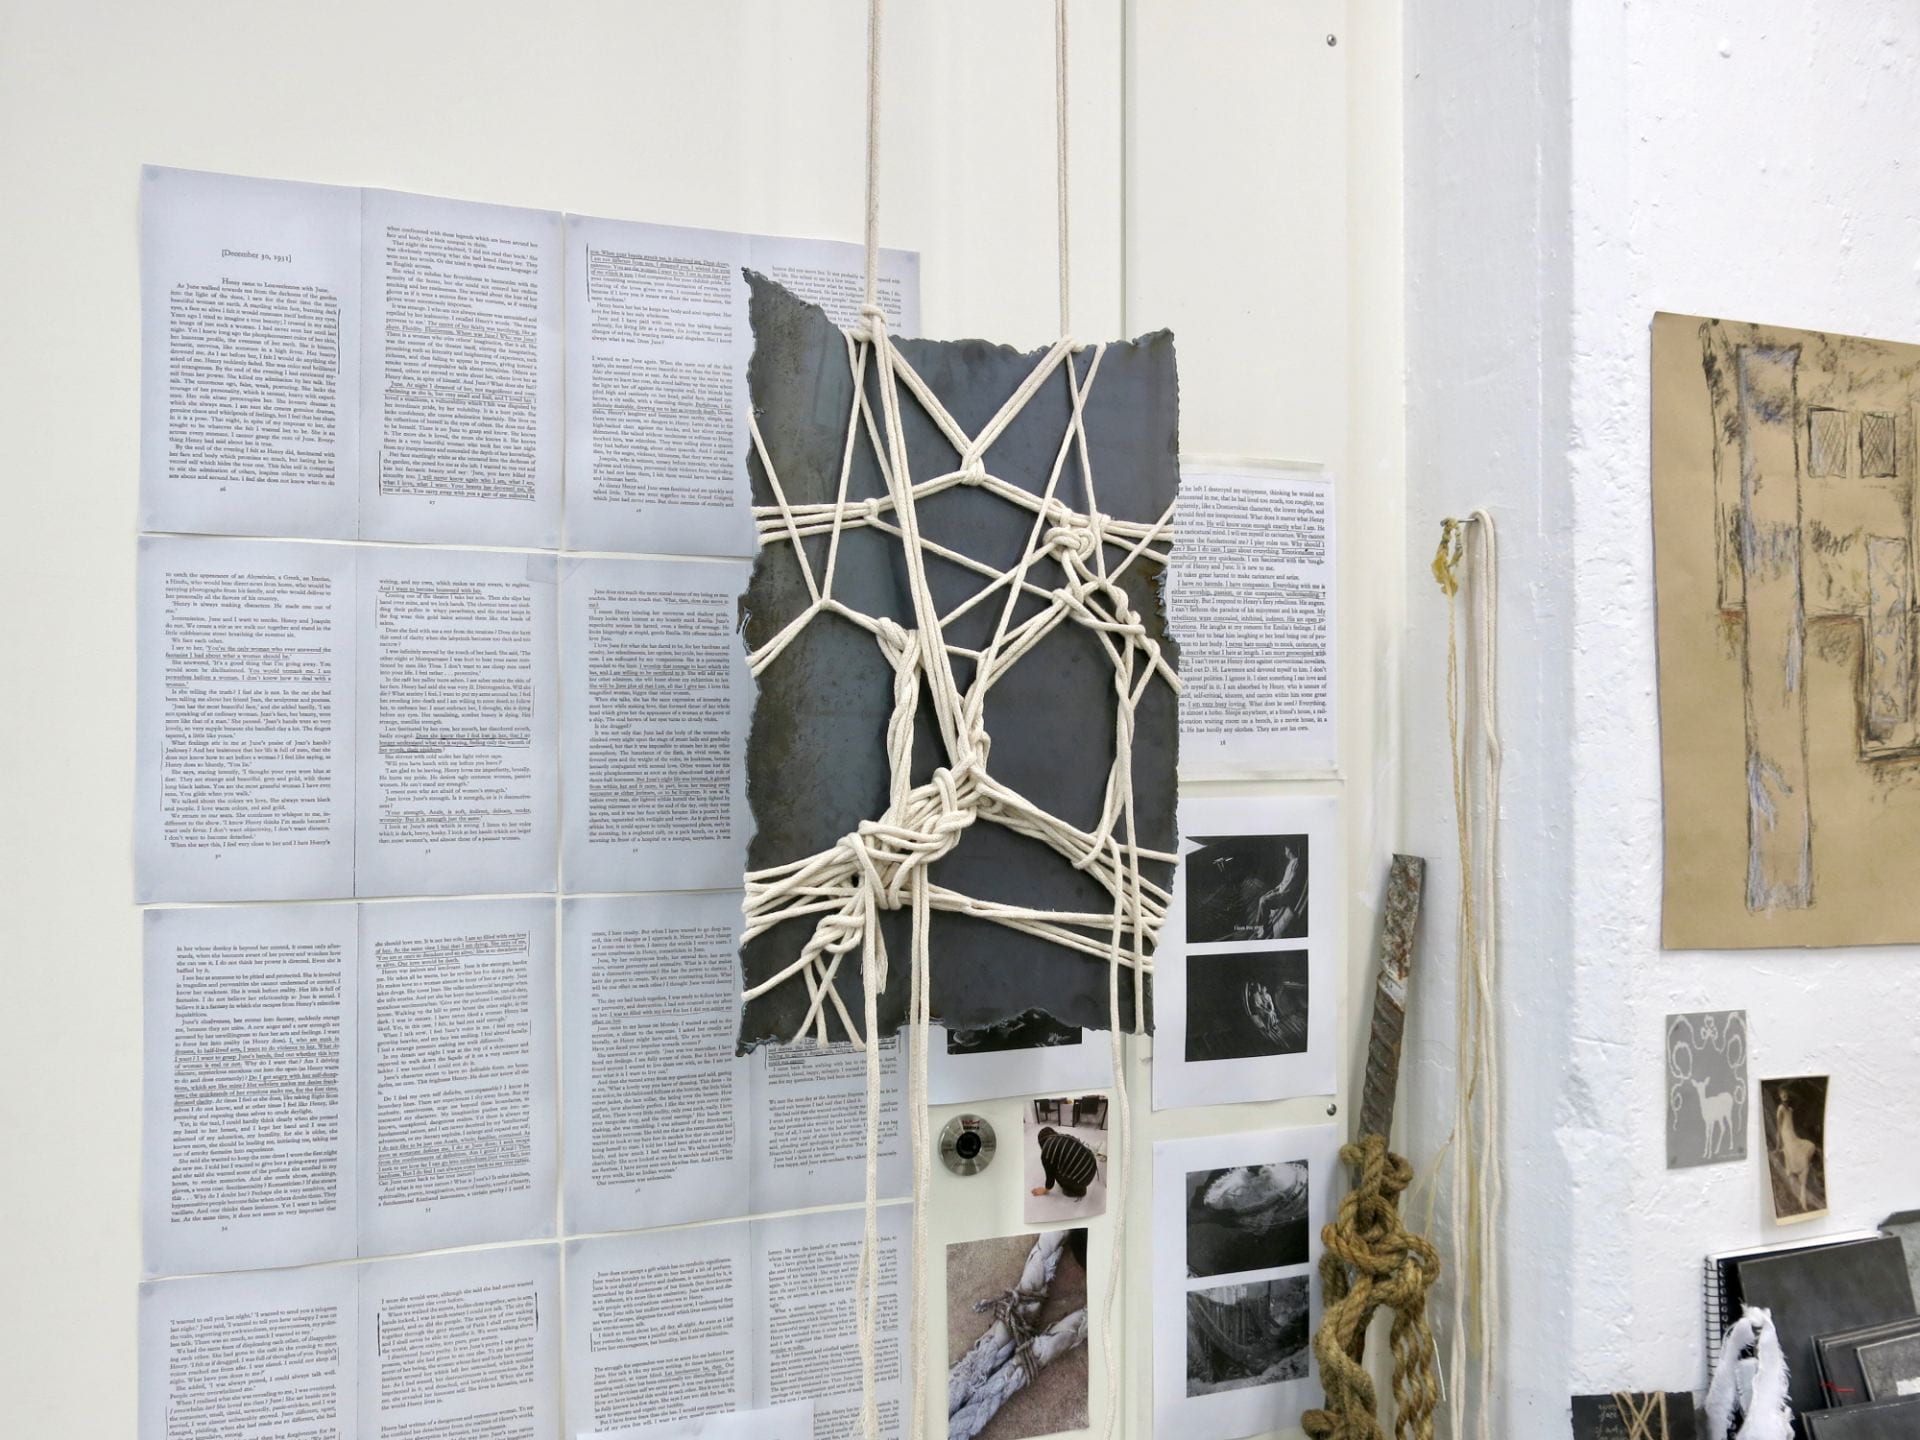 Photograph of Yvonne's studio space with rope-bound steel sculpture and annotated readings on the walls